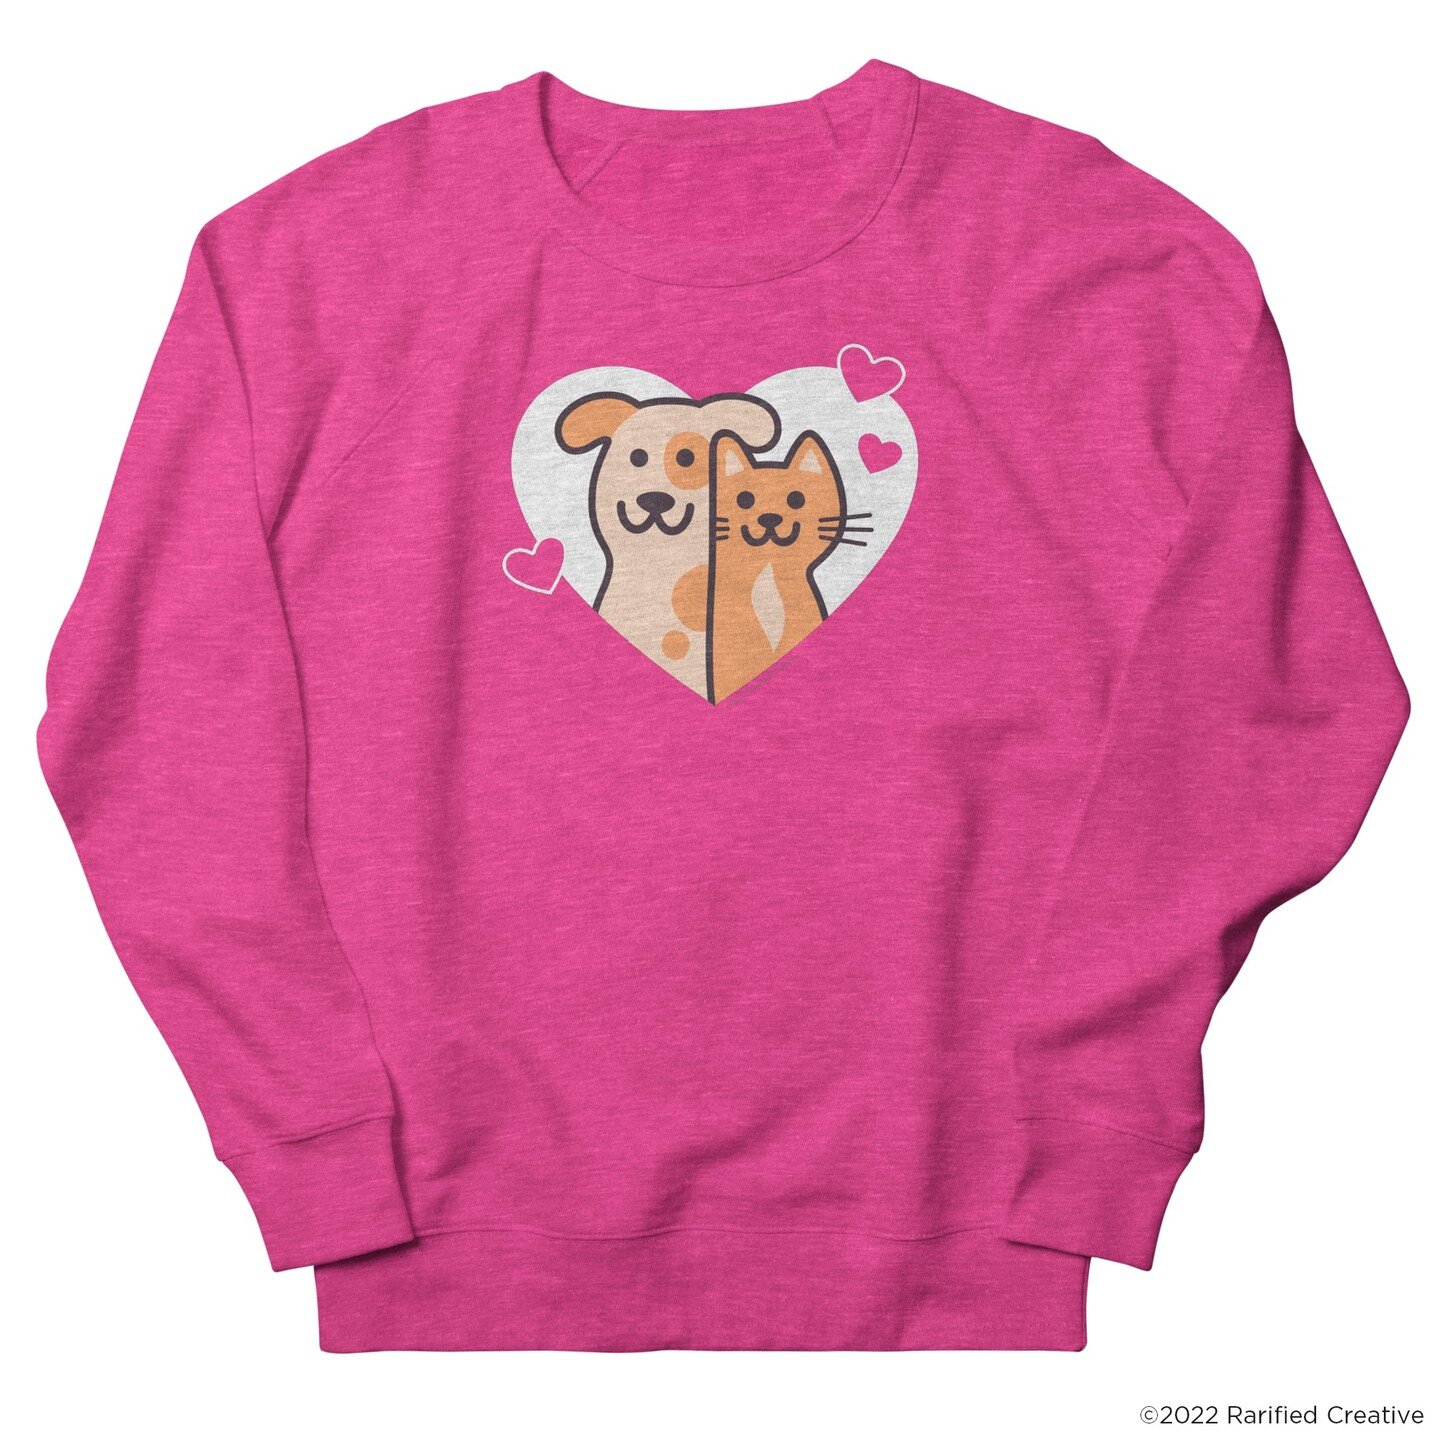 Be prepared, whatever the weather, with new Rarified gear. This sweet dog &amp; kitty were designed to show off your love of pets! Available at rarifiedcreative.threadless.com (link in bio). Thanks, friends!💘 #petlovers #petlover #petlove 
#catsandd